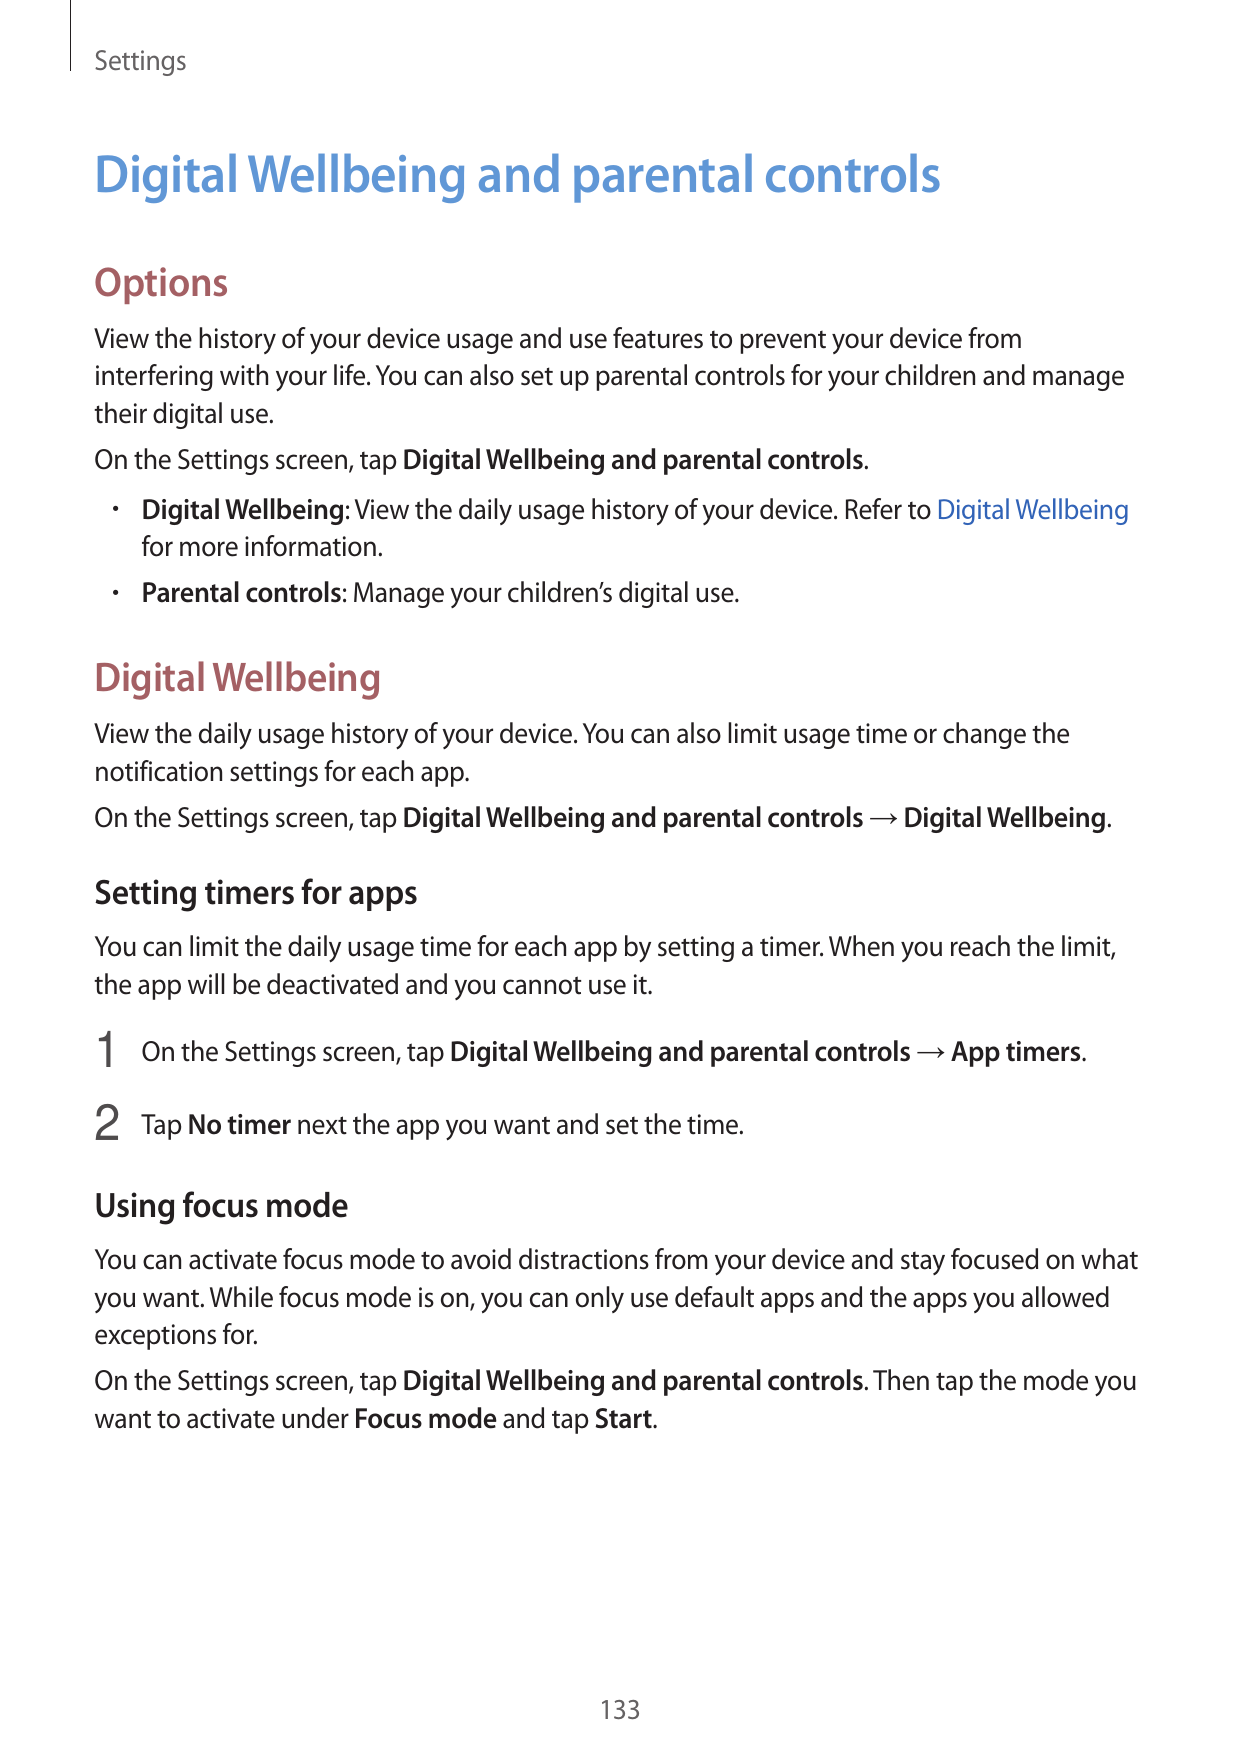 SettingsDigital Wellbeing and parental controlsOptionsView the history of your device usage and use features to prevent your dev